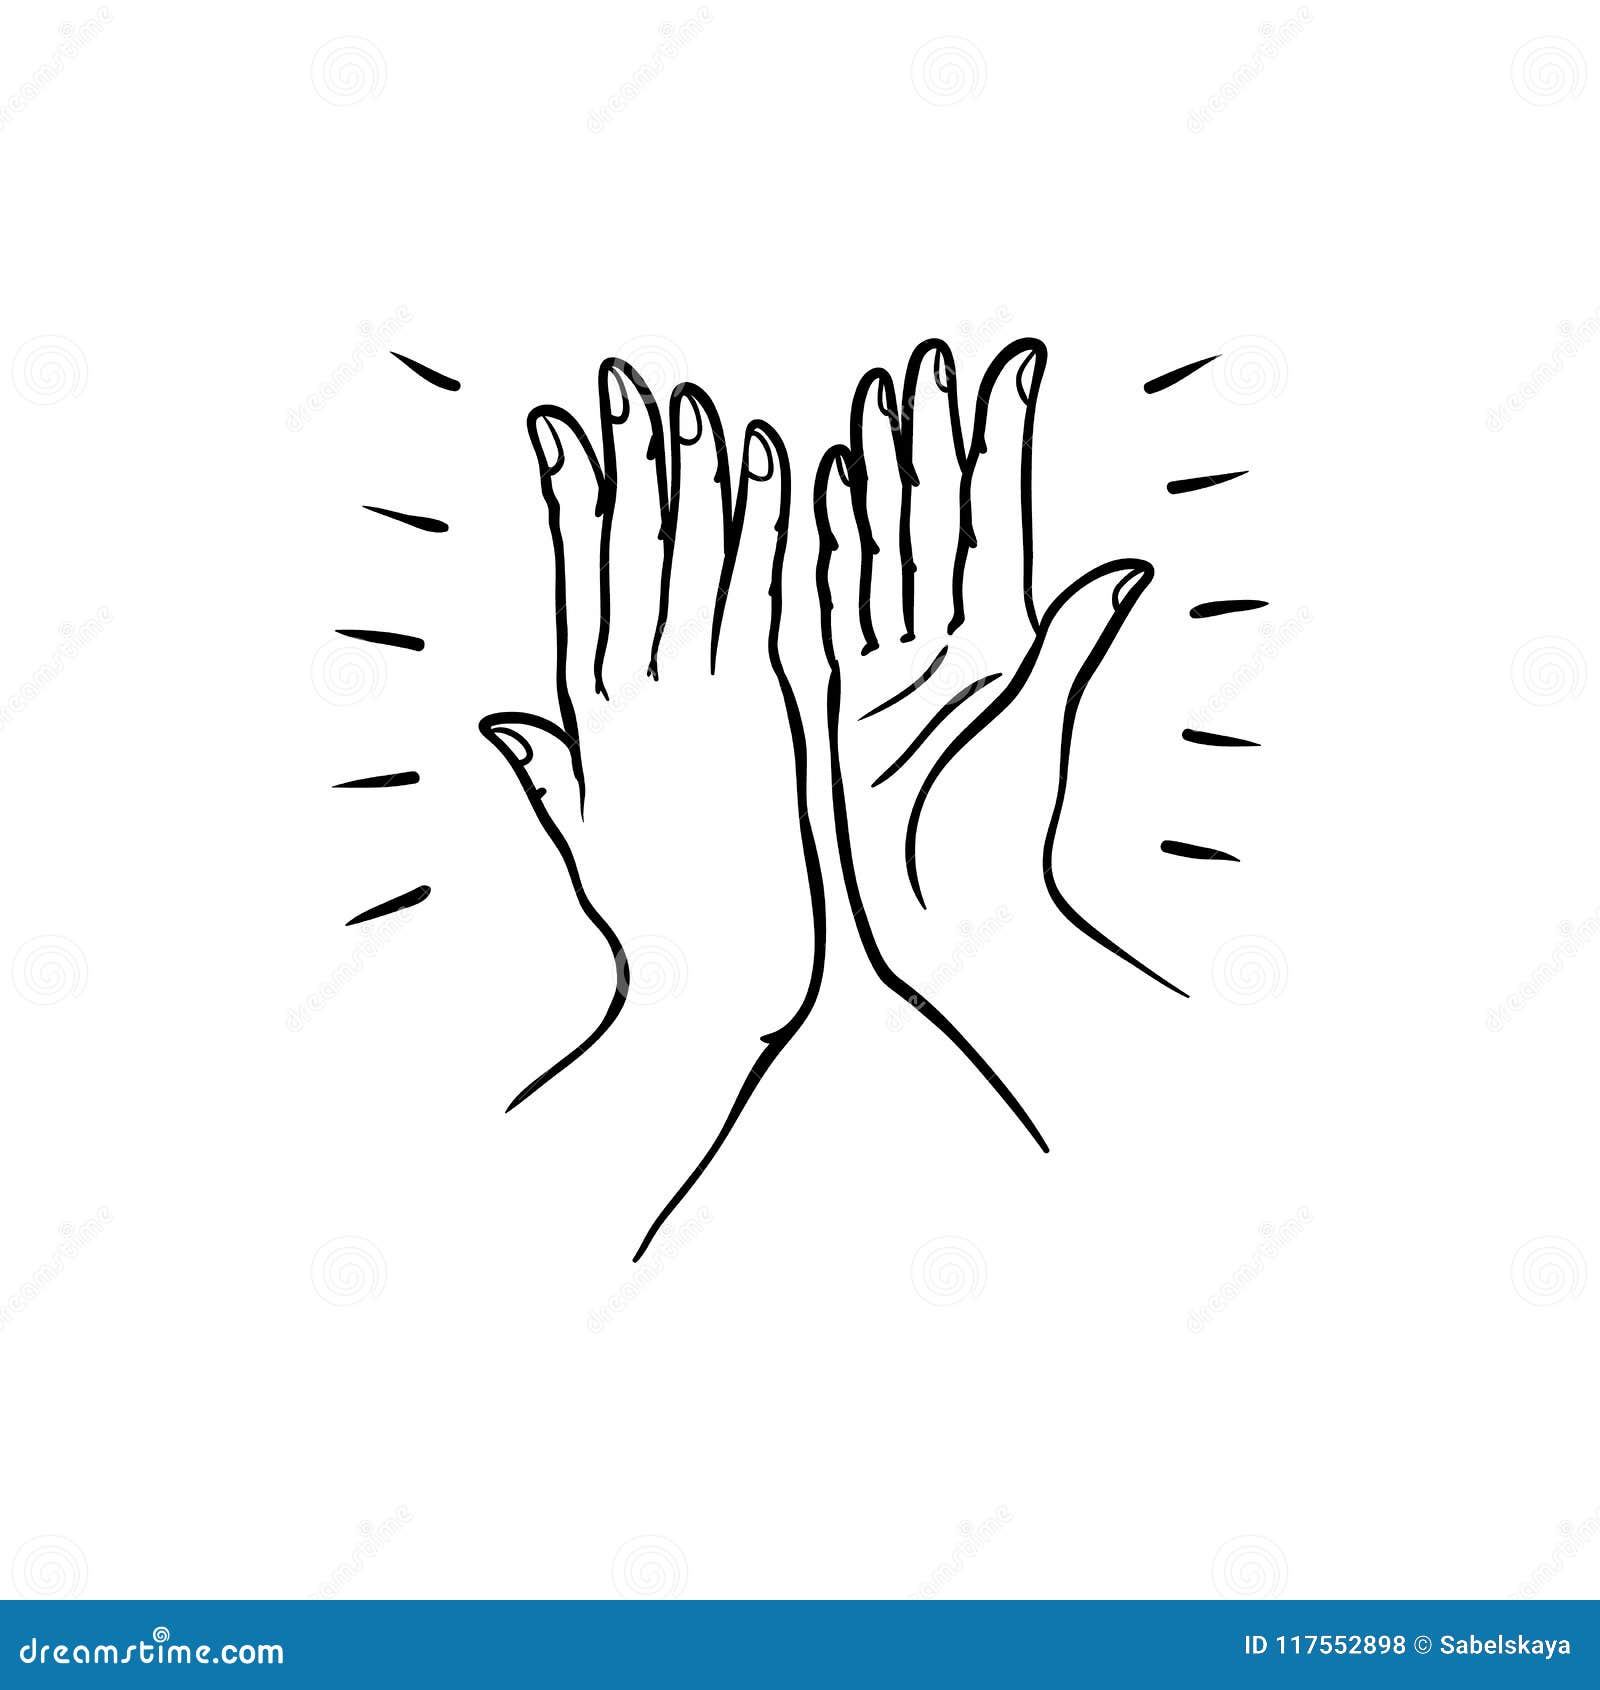 Premium Vector  High five hand drawn lettering two hands clapping in high  five gesture teamwork friendship unity